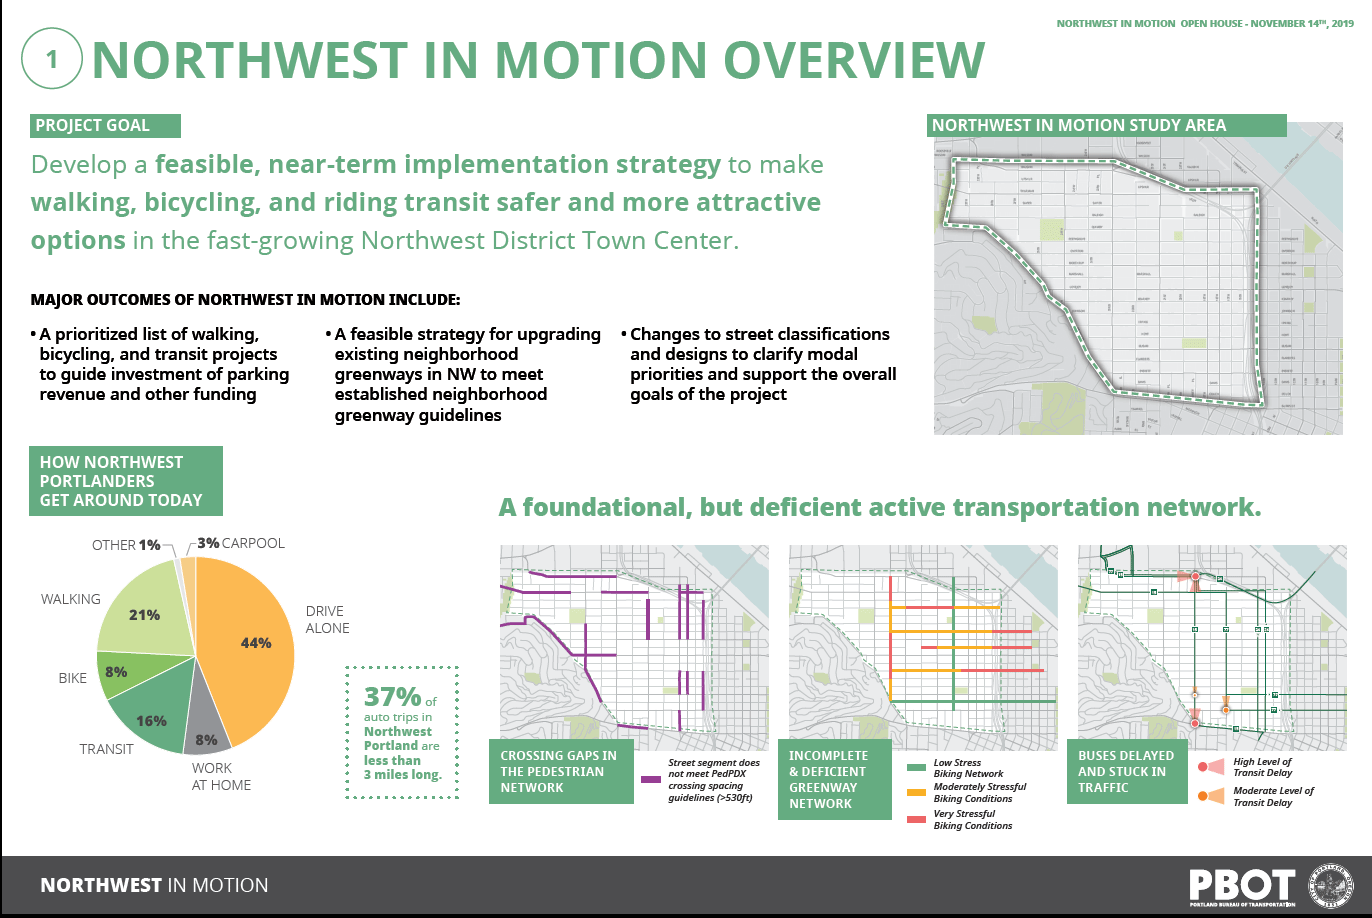 Board shows: A map of the Northwest in Motion Study Area, which stretches from Vaughn in the north to Burnside in the south, and 30th in the west to 14th in the east. 3 diagrams show that there are many areas with deficient walking and biking infrastructure, such as many streets that do not have enough crossings and streets that are considered stressful to bike on. There are also several locations where public buses get delayed and stuck in traffic. A pie chart shows that, today, 44% of people who live in Northwest drive alone for their commute, while 21% walk, 8% bike and 16% take transit. 